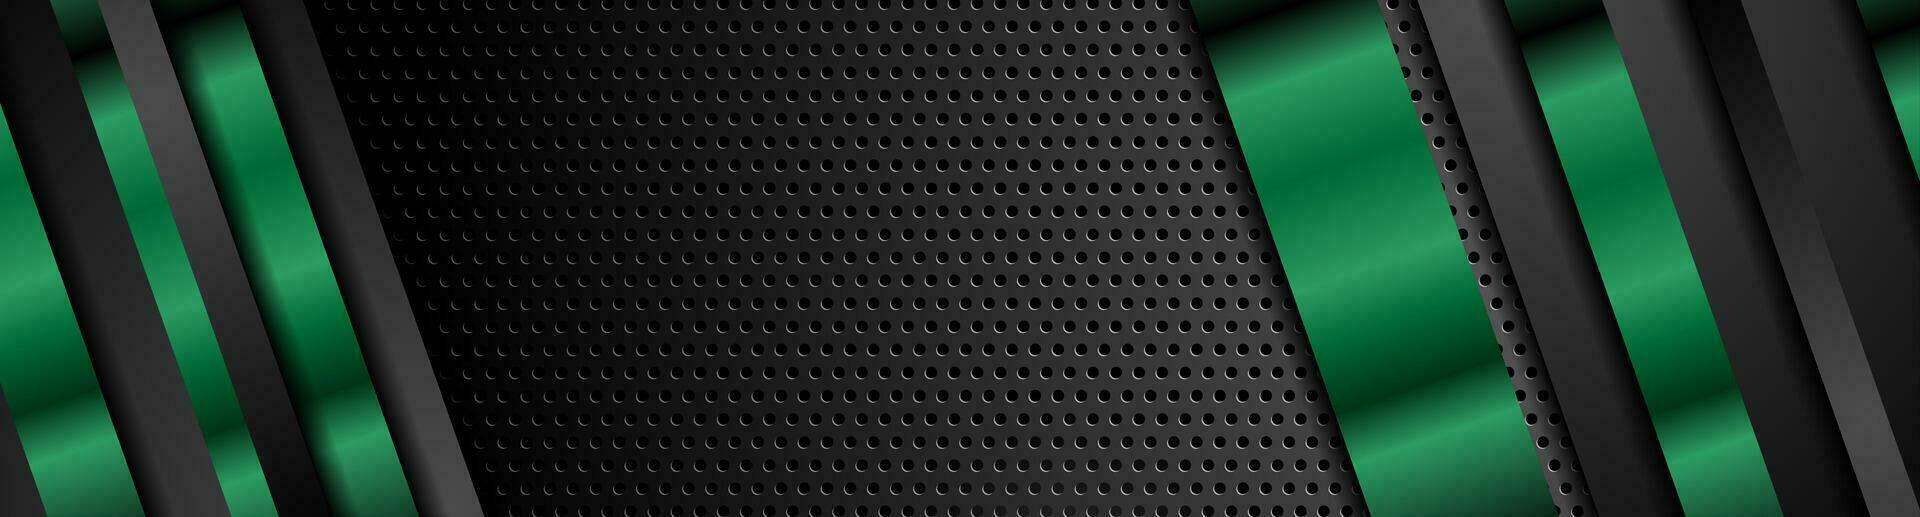 Black green metal stripes on dark perforated background vector